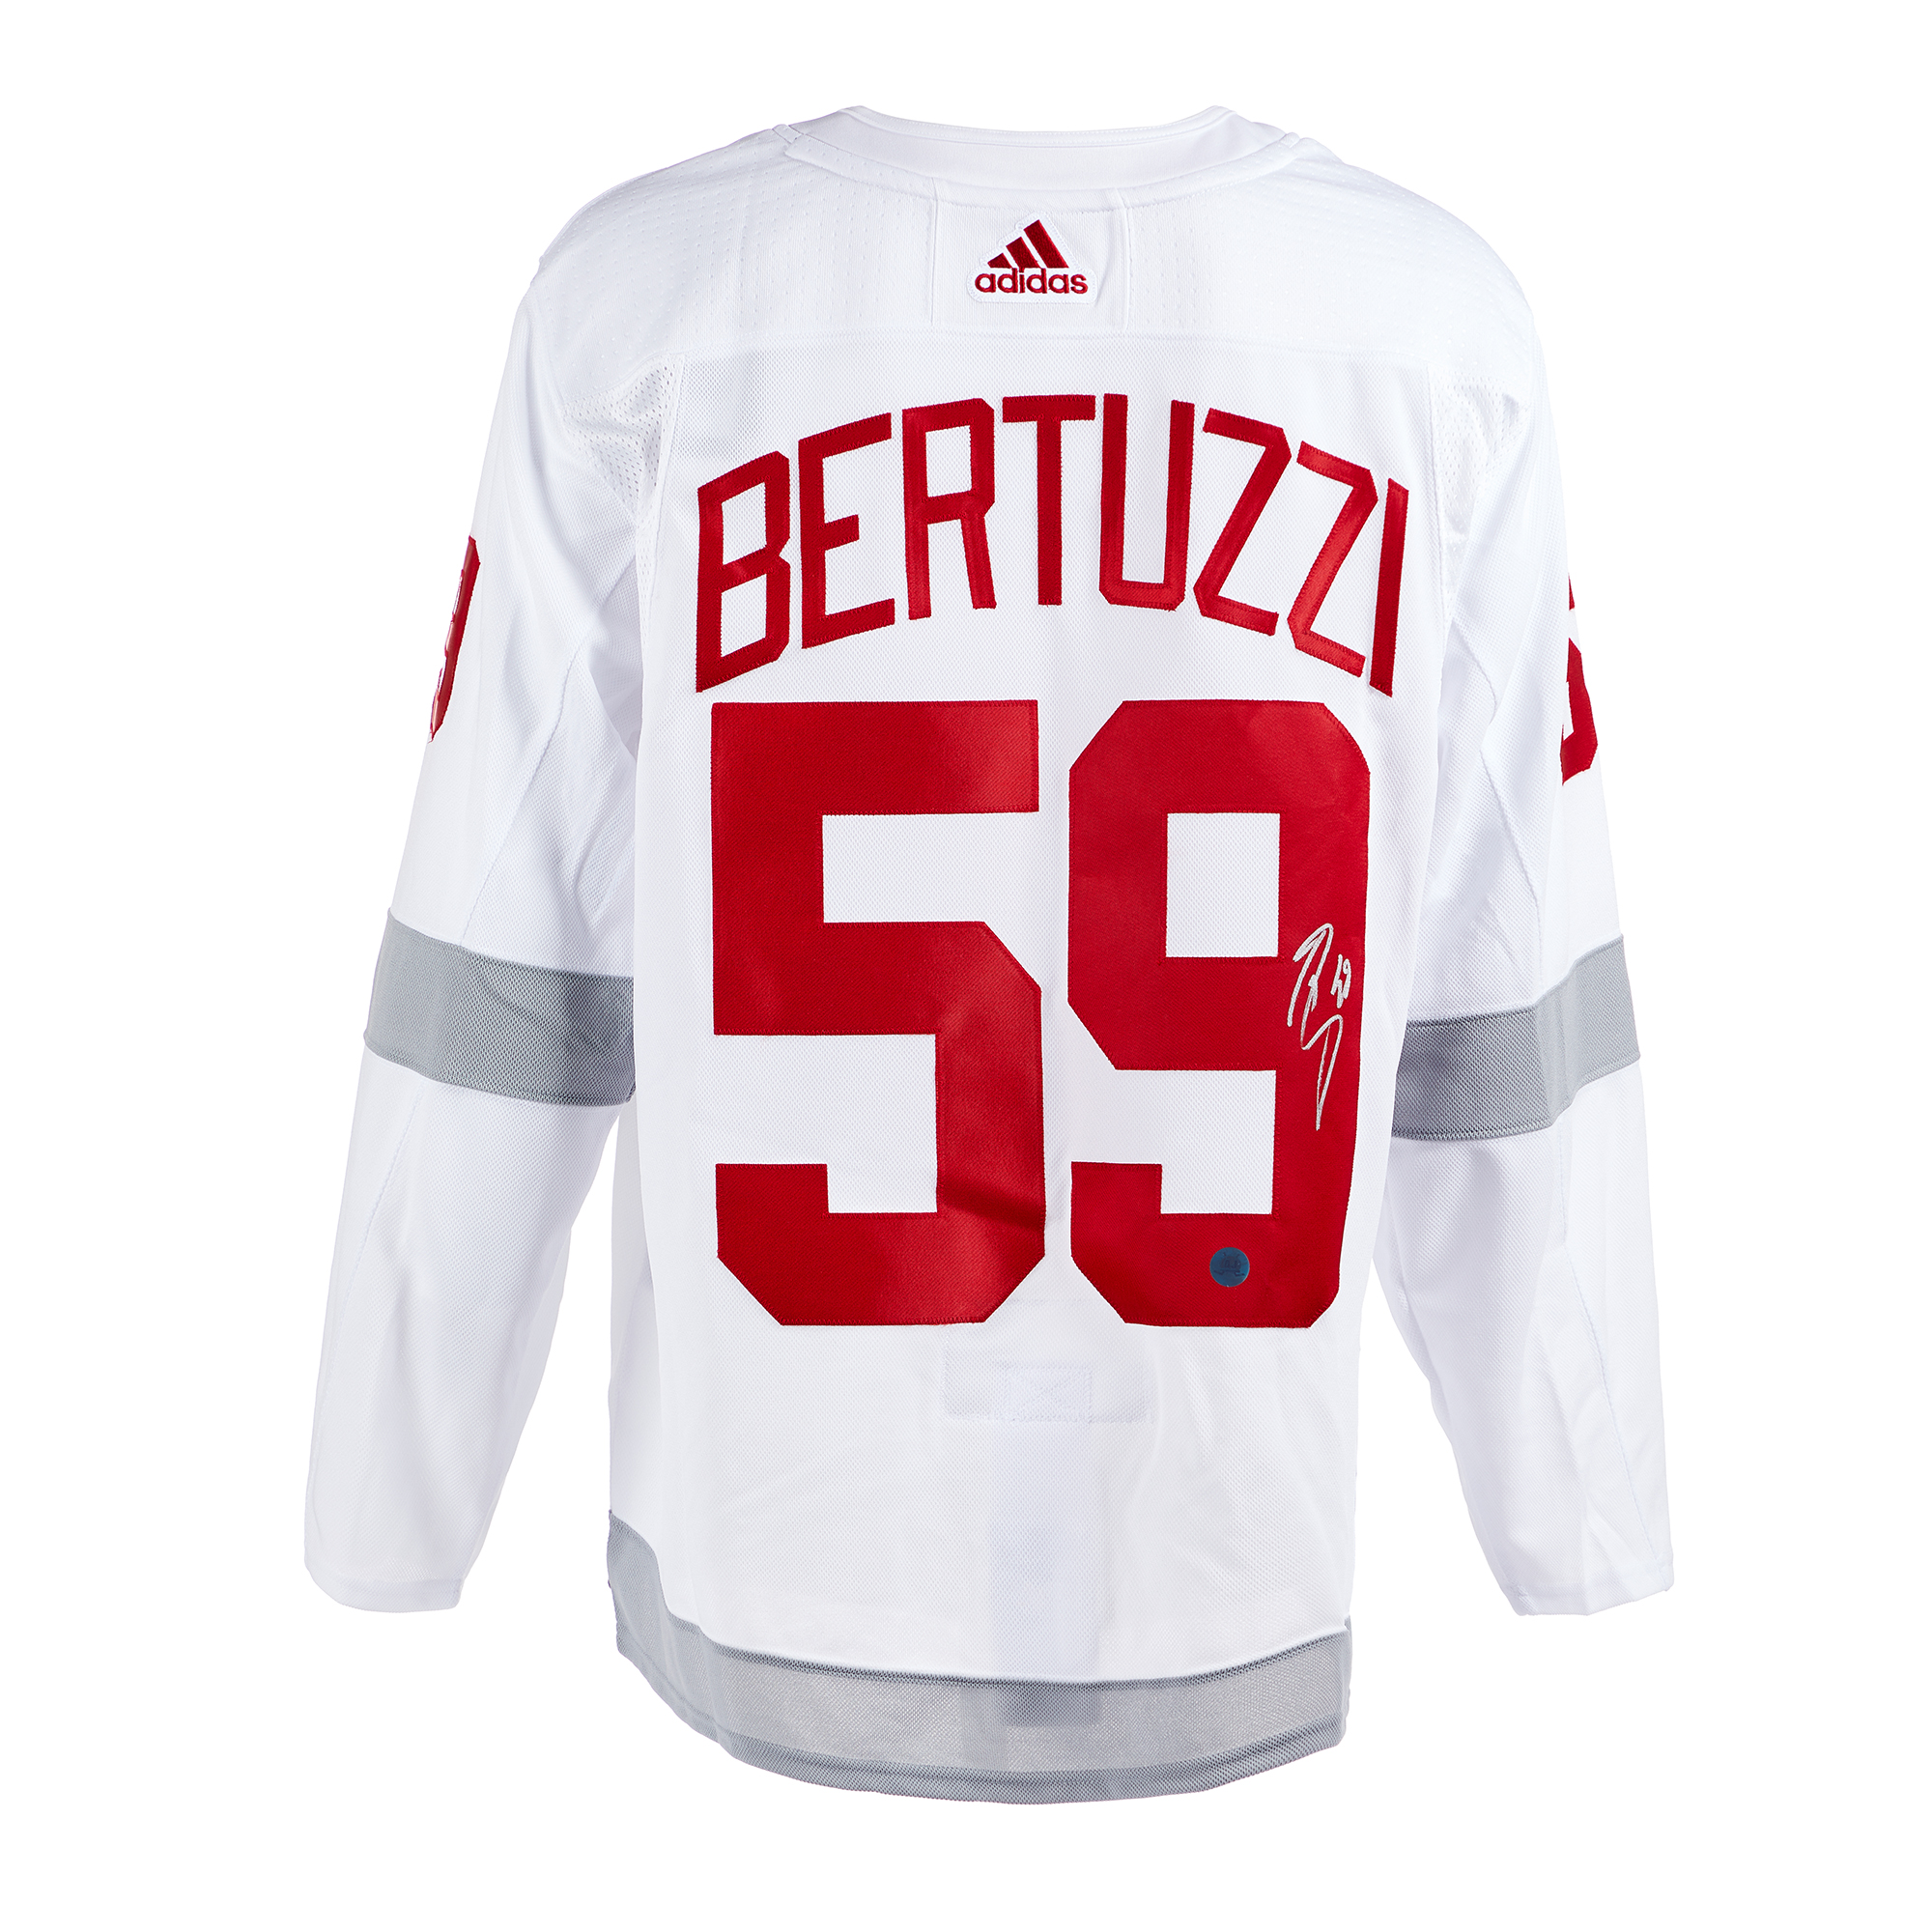 TYLER BERTUZZI Signed Detroit Red Wings Red Reebok Jersey - NHL Auctions